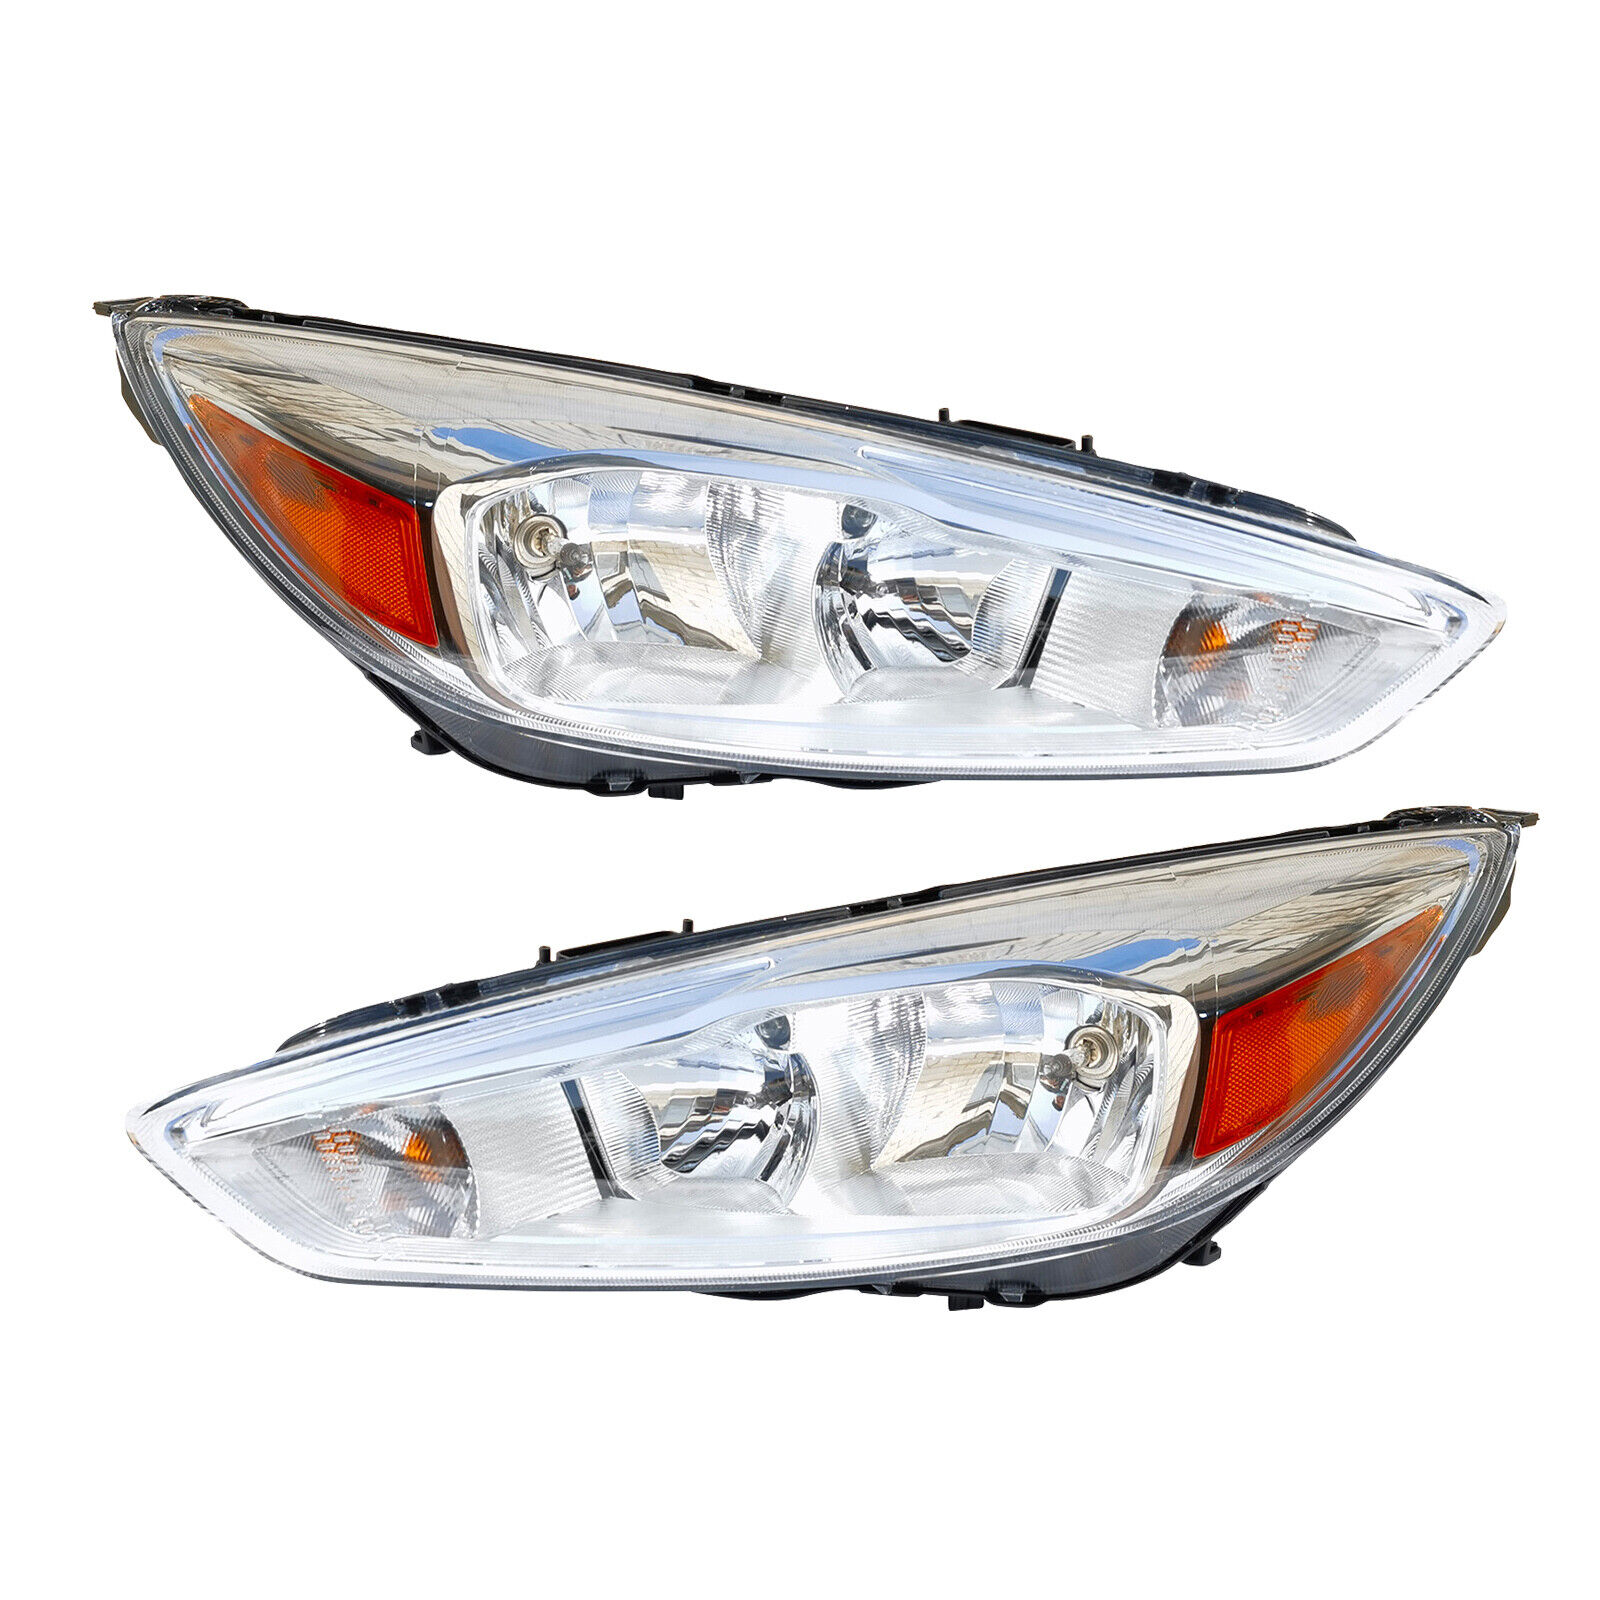 Headlight Assembly for 2015-2018 Ford Focus Chrome Housing Head Lamps